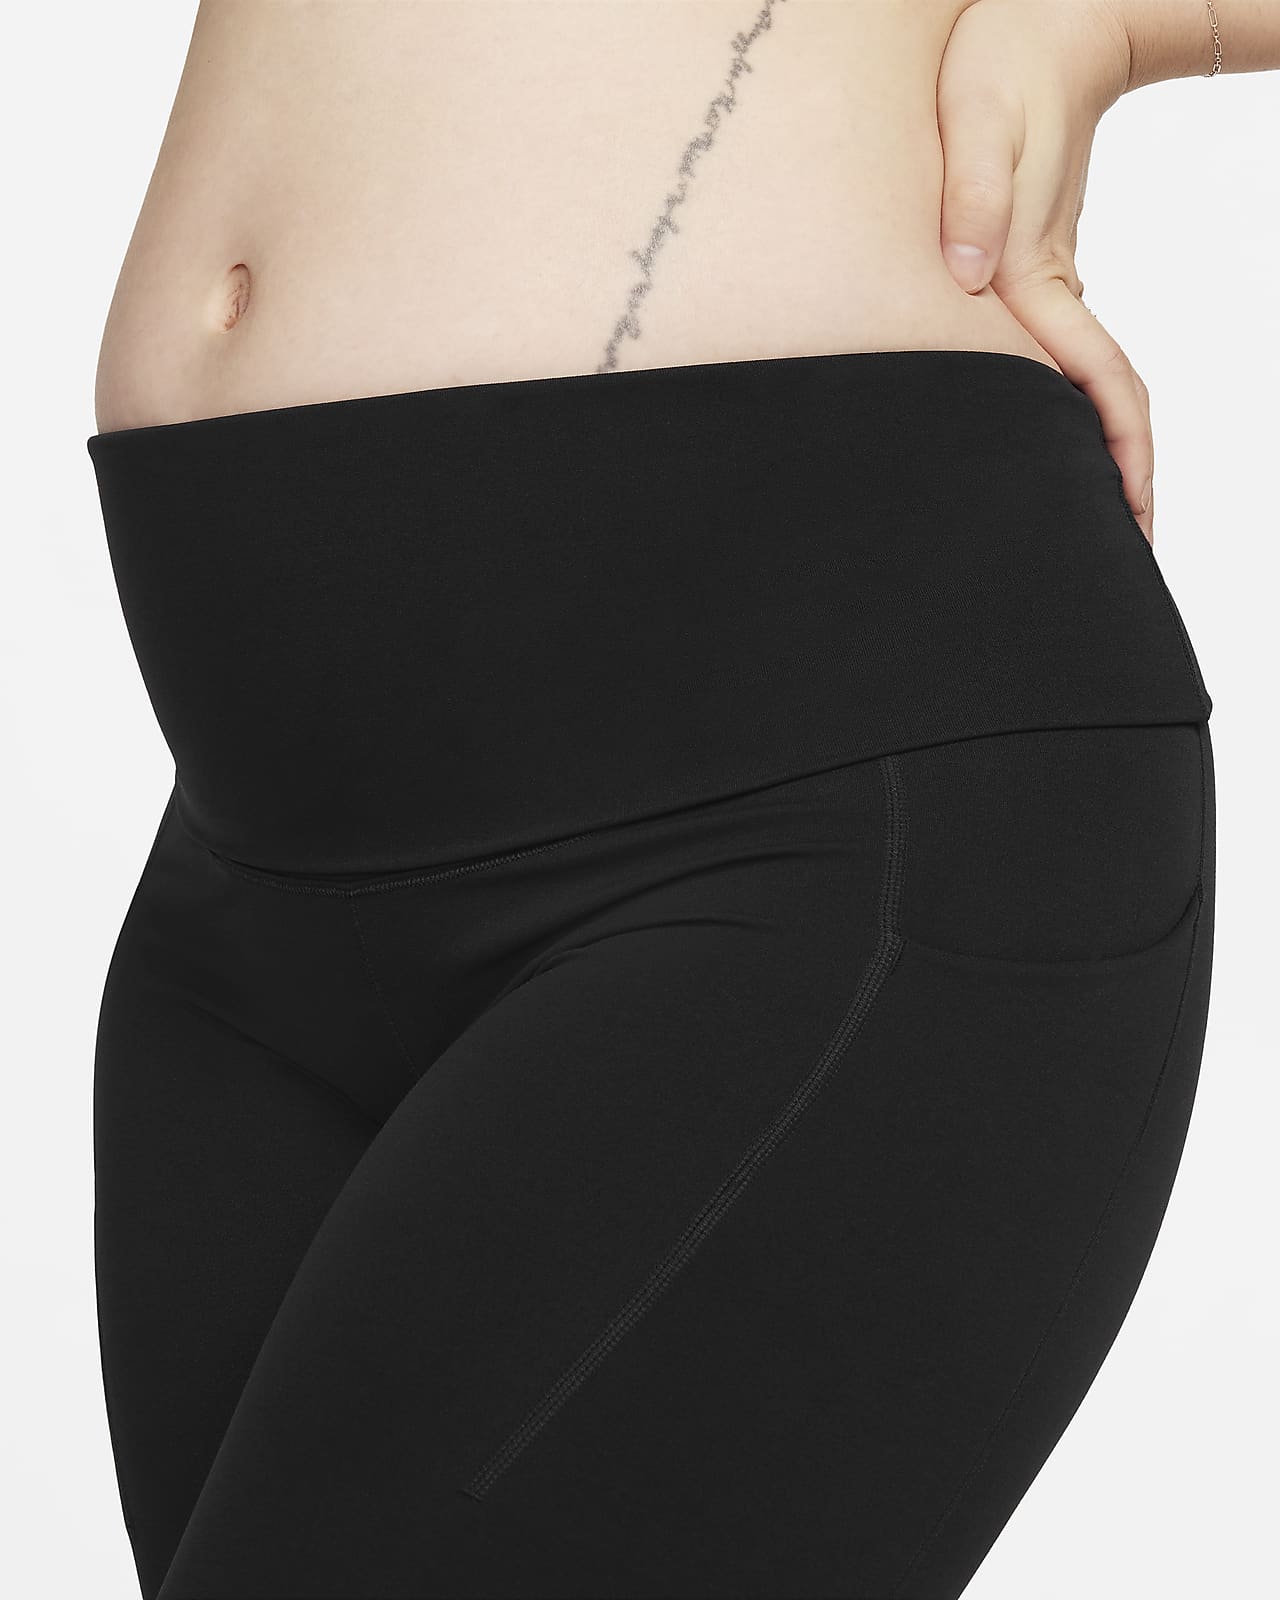 nike maternity leggings know what's up. I feel so supported but